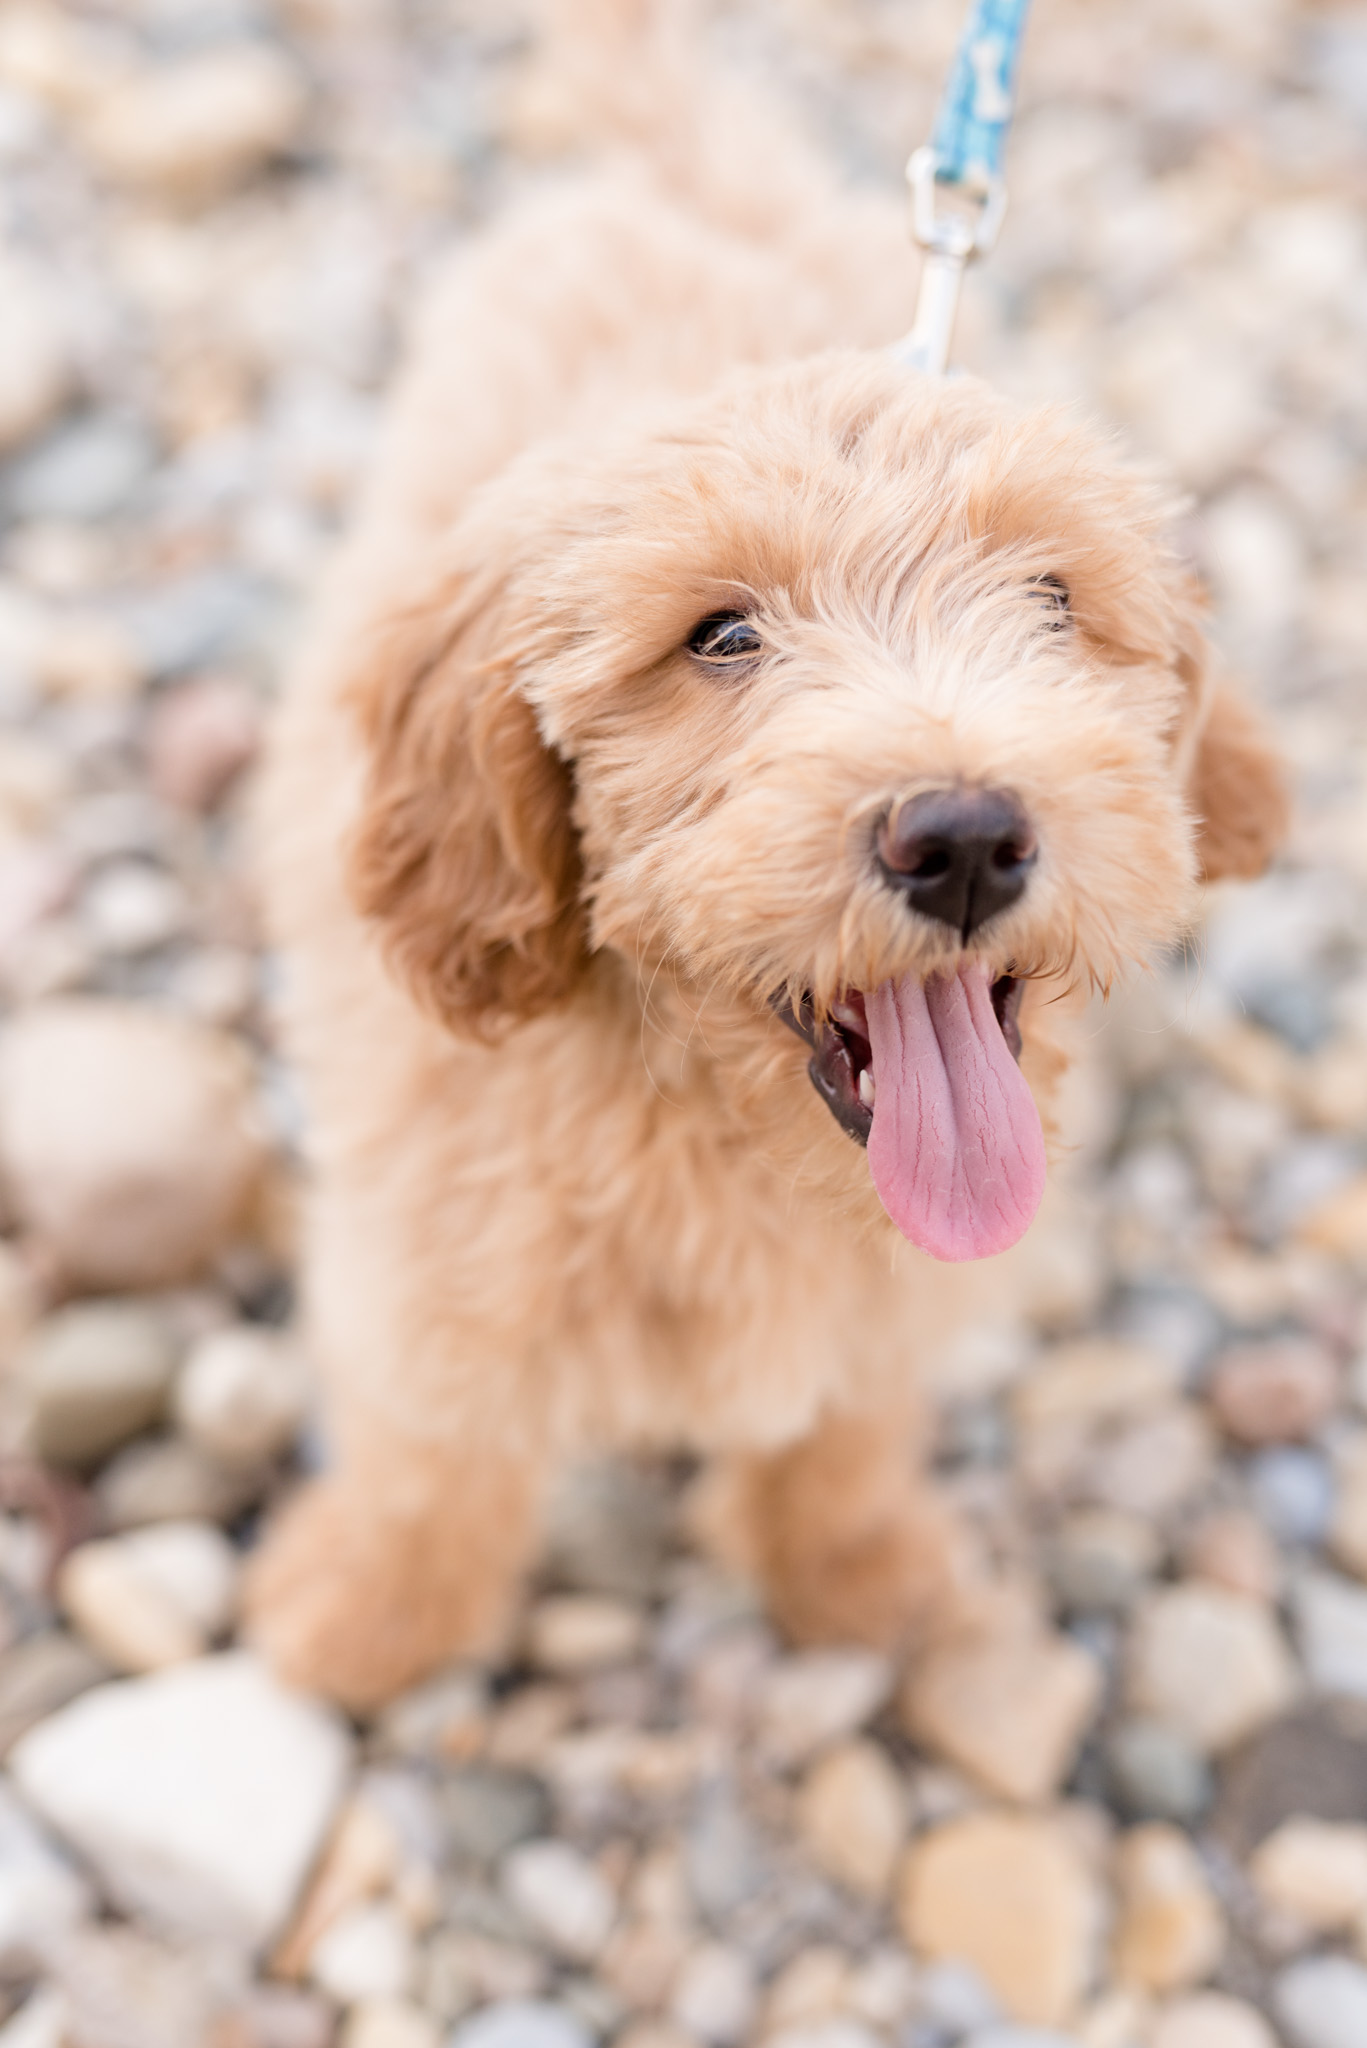 Goldendoodle puppy looks at camera.